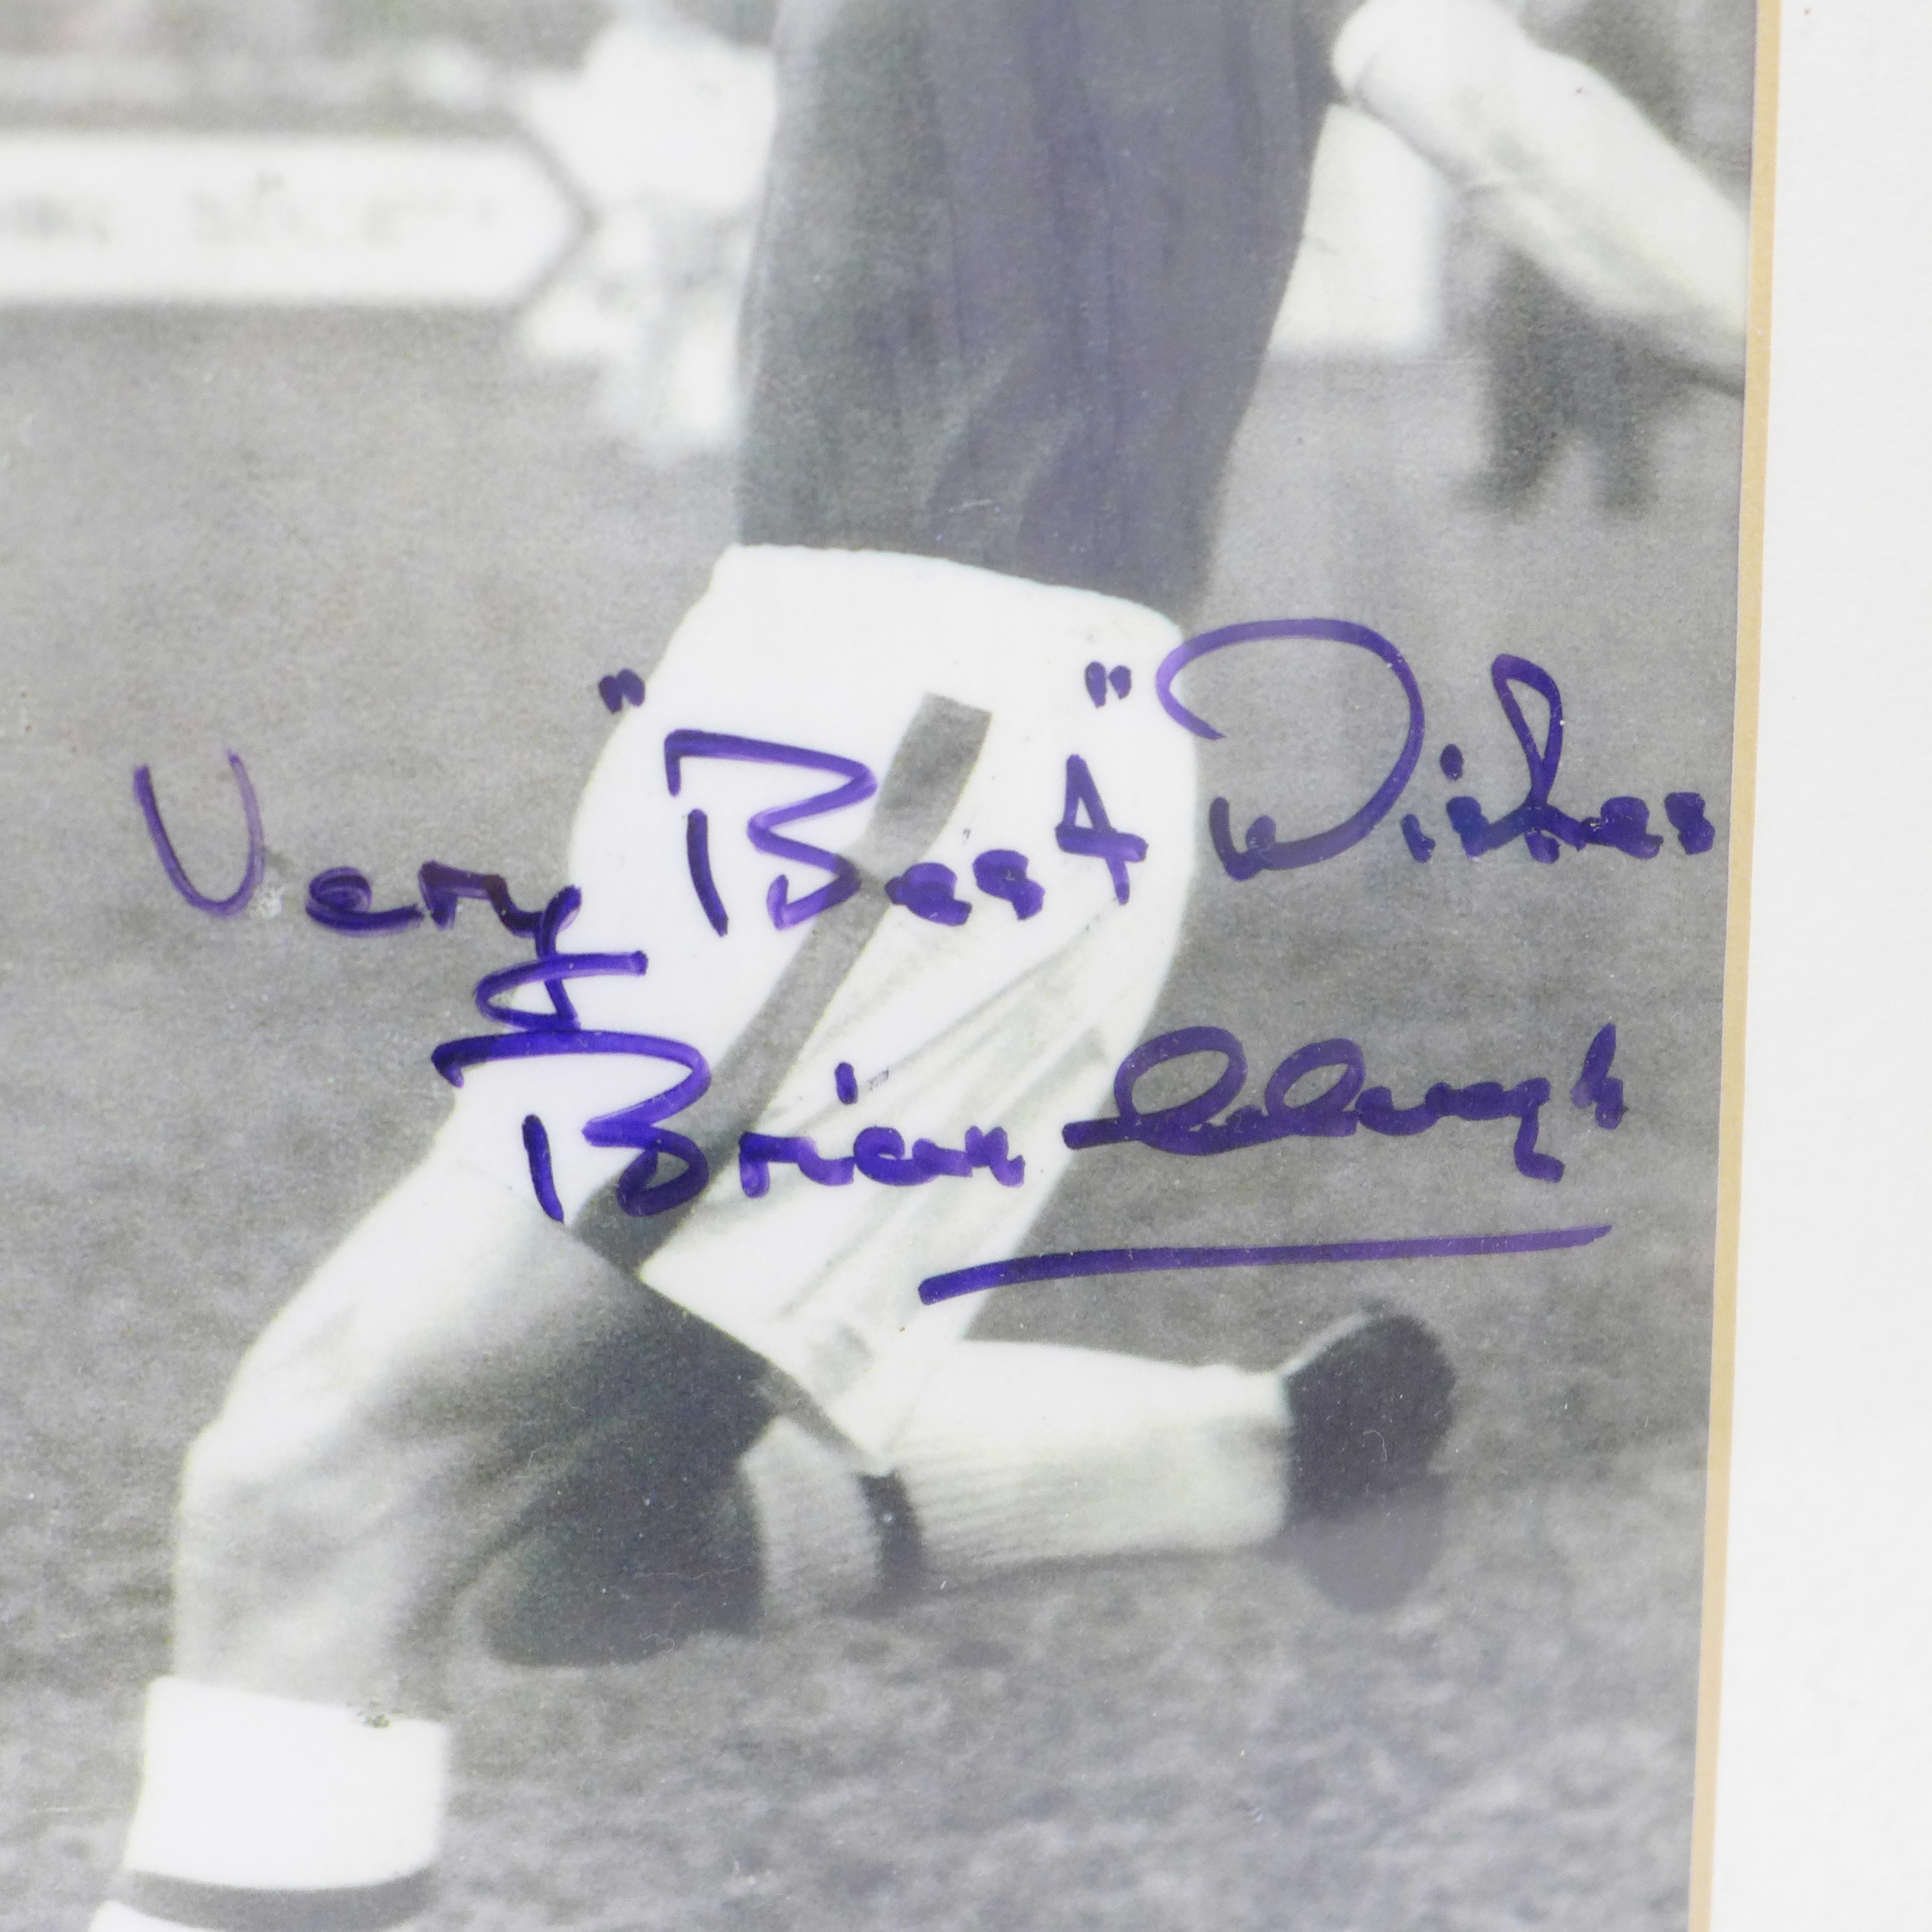 A framed photograph of Brian Clough playing for Middlesbrough, signed - Image 2 of 2